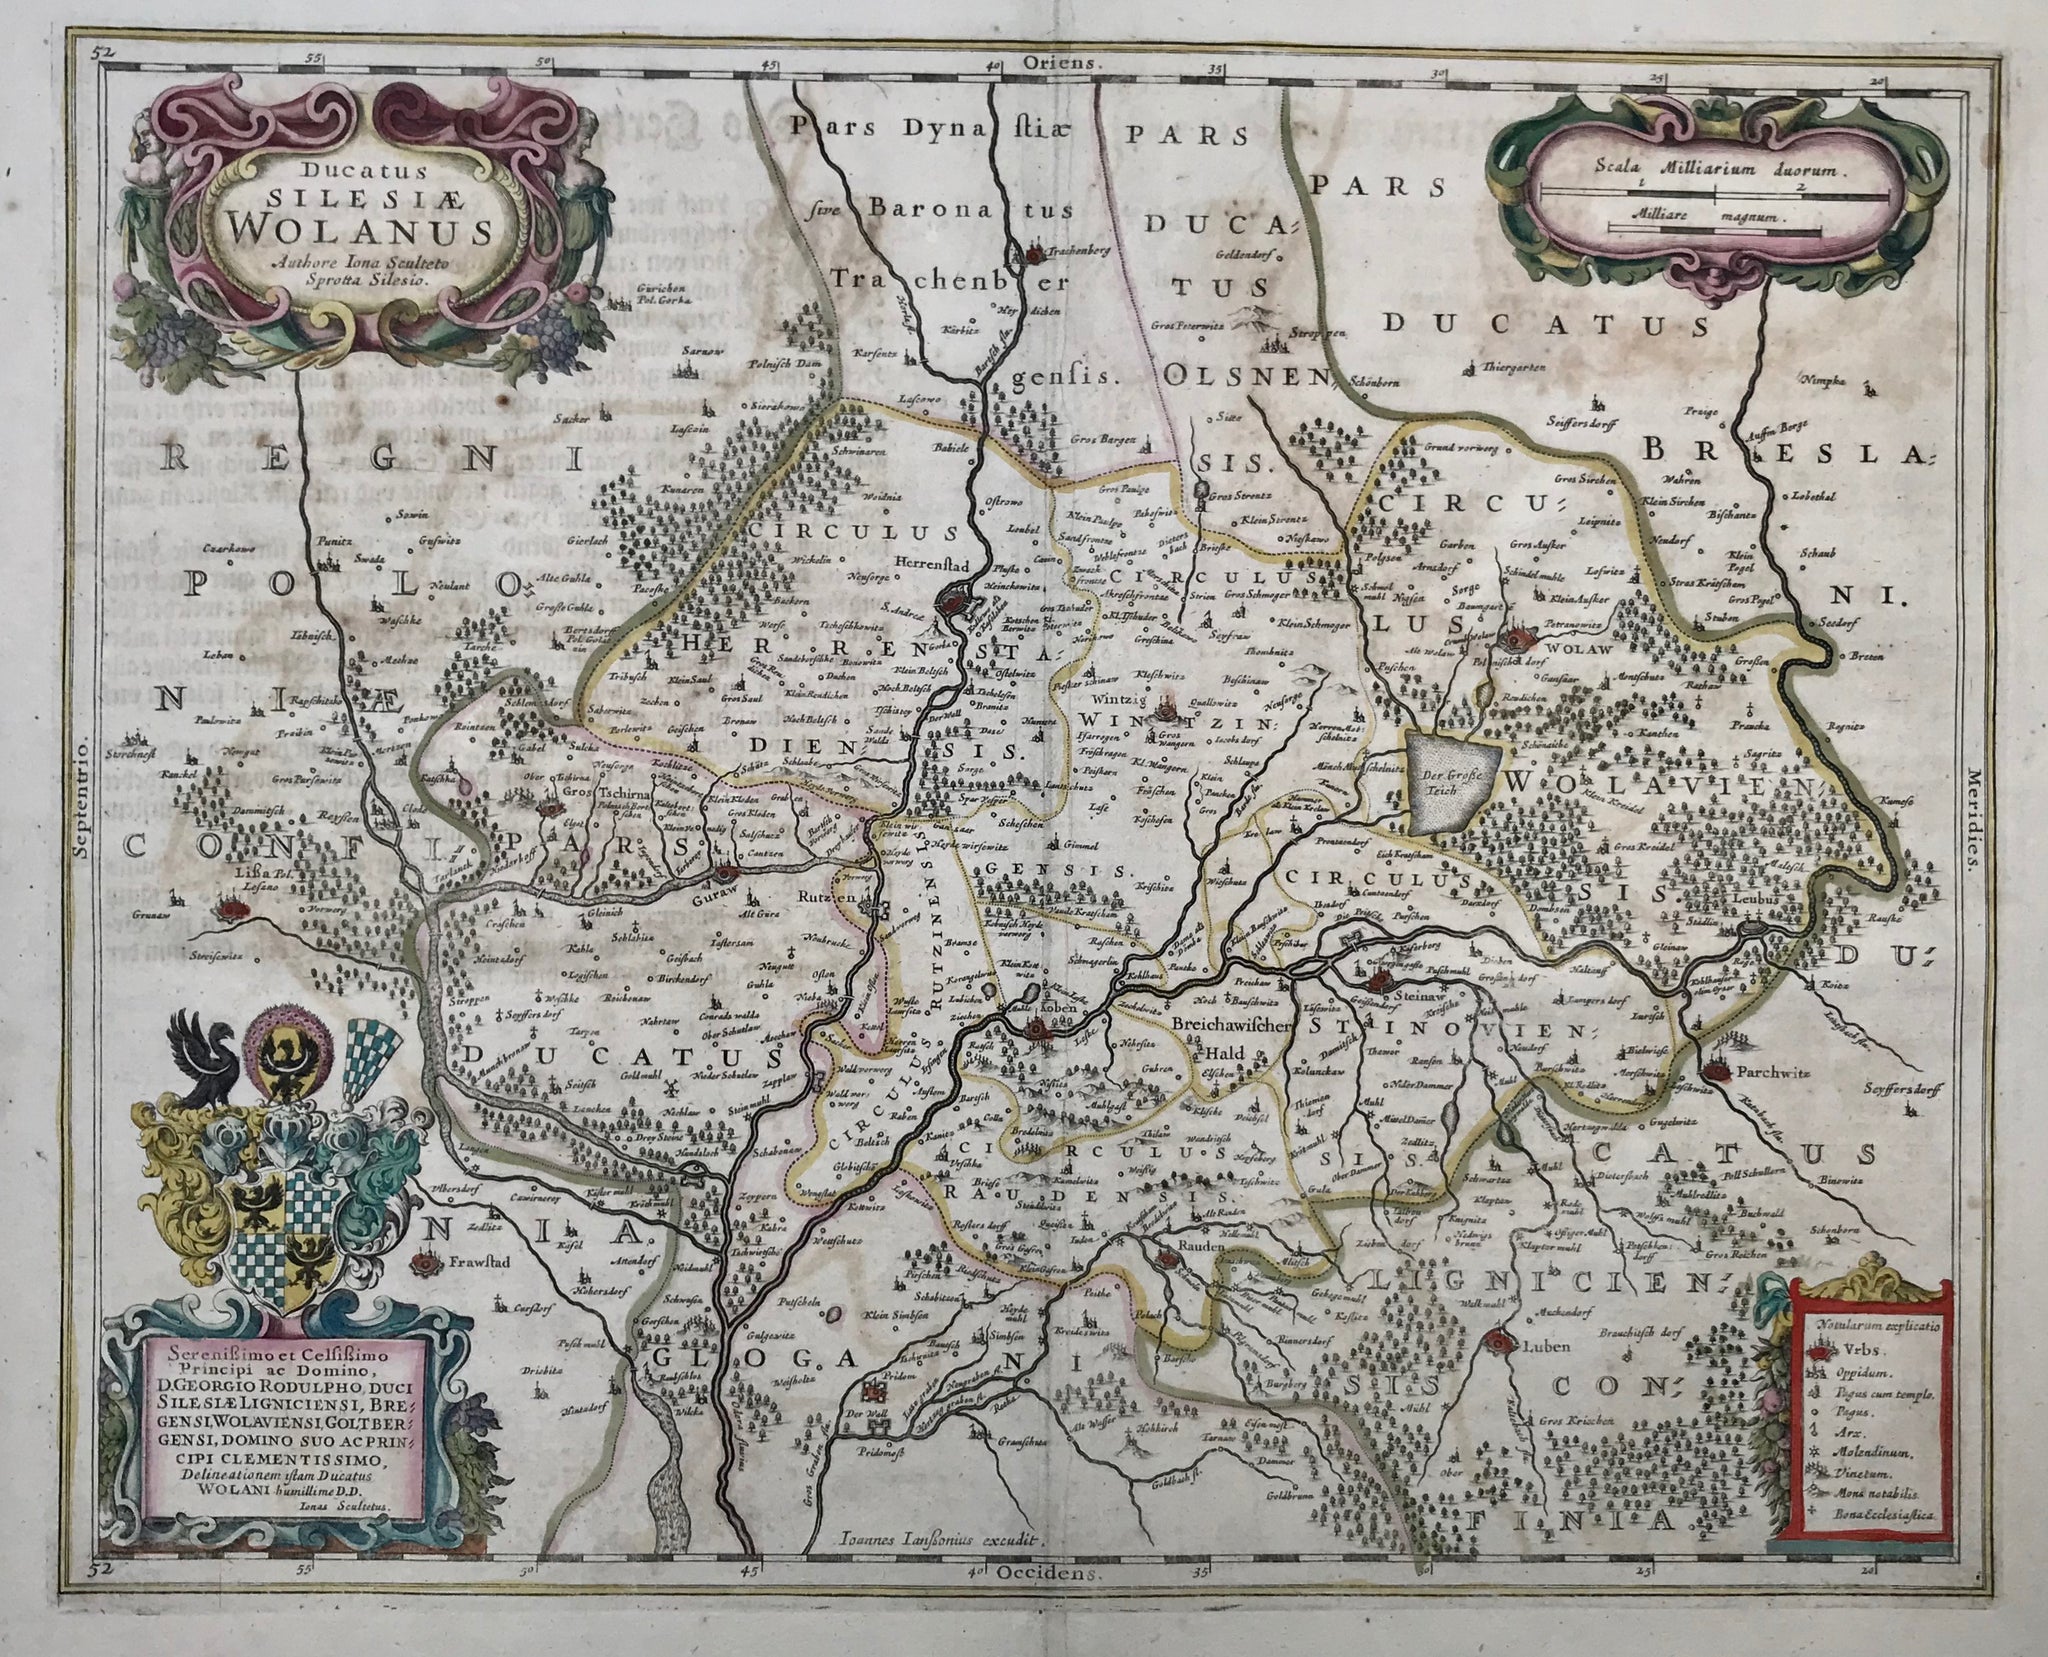 "Ducatus Silesiae Wolanus" Copper etching by Ionas Scultetus for Jan Jansson ca 1650. Original hand coloring.  This map is east oriented (north is on the left side). At the bottom of the map the Oder River "flows in" and "flows out" under the mileage legend in the upper right corner. In the lower right corner is Luben on the Kaltebach River. Above the coat-of-arms in the lower left is the town of Lissa (Leszno).